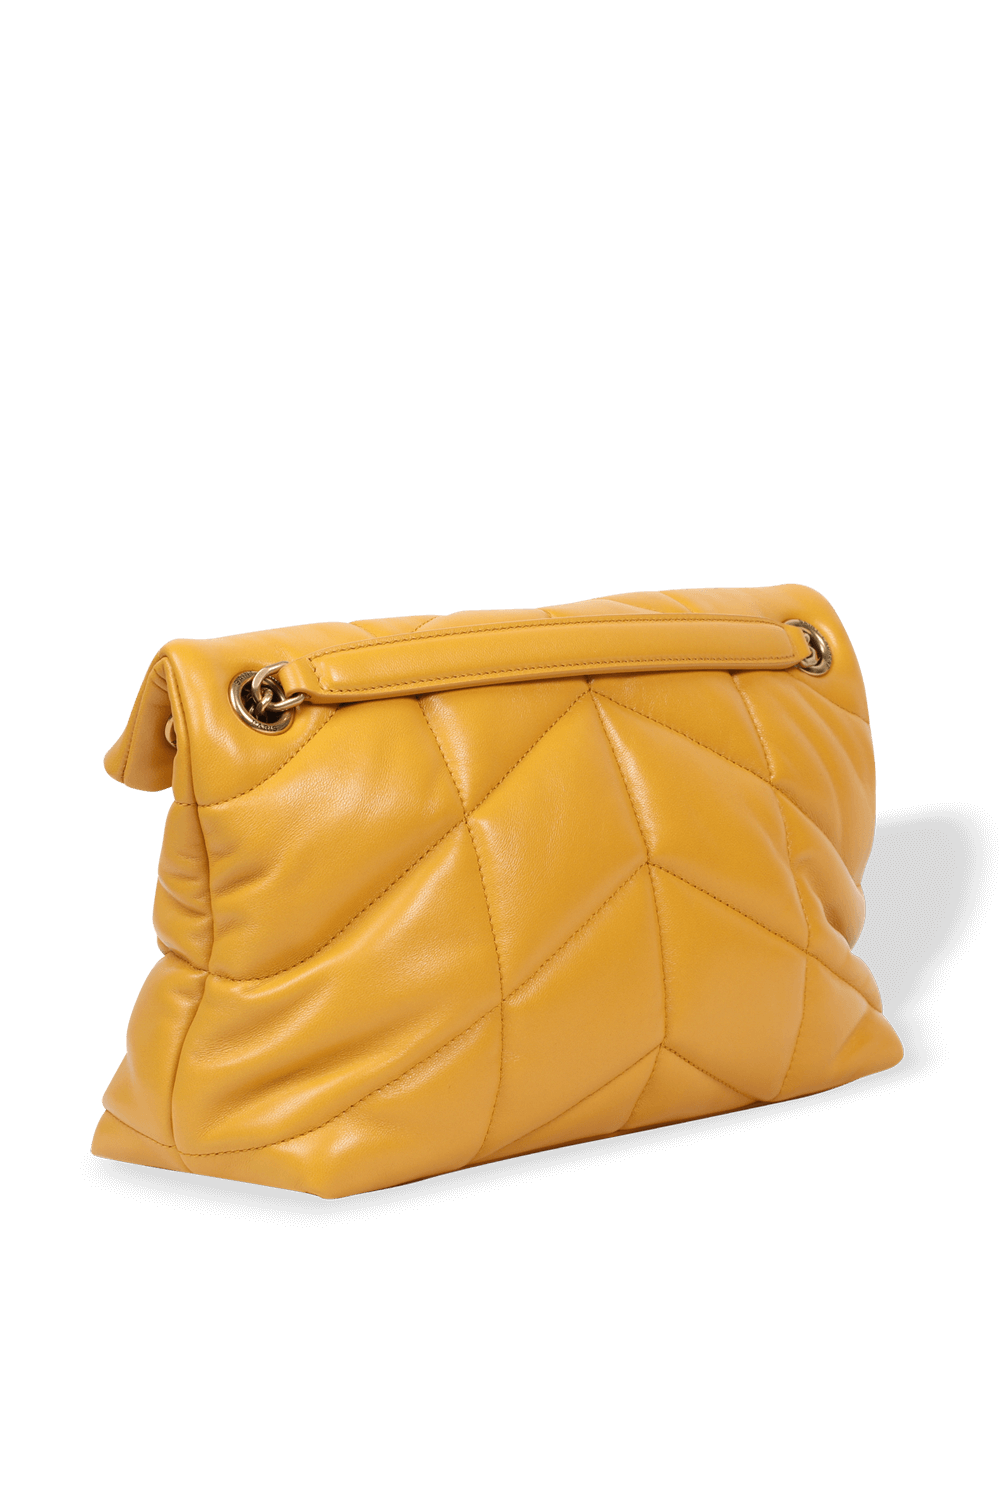 Puffer Small Bag in Mustard Leather SAINT LAURENT